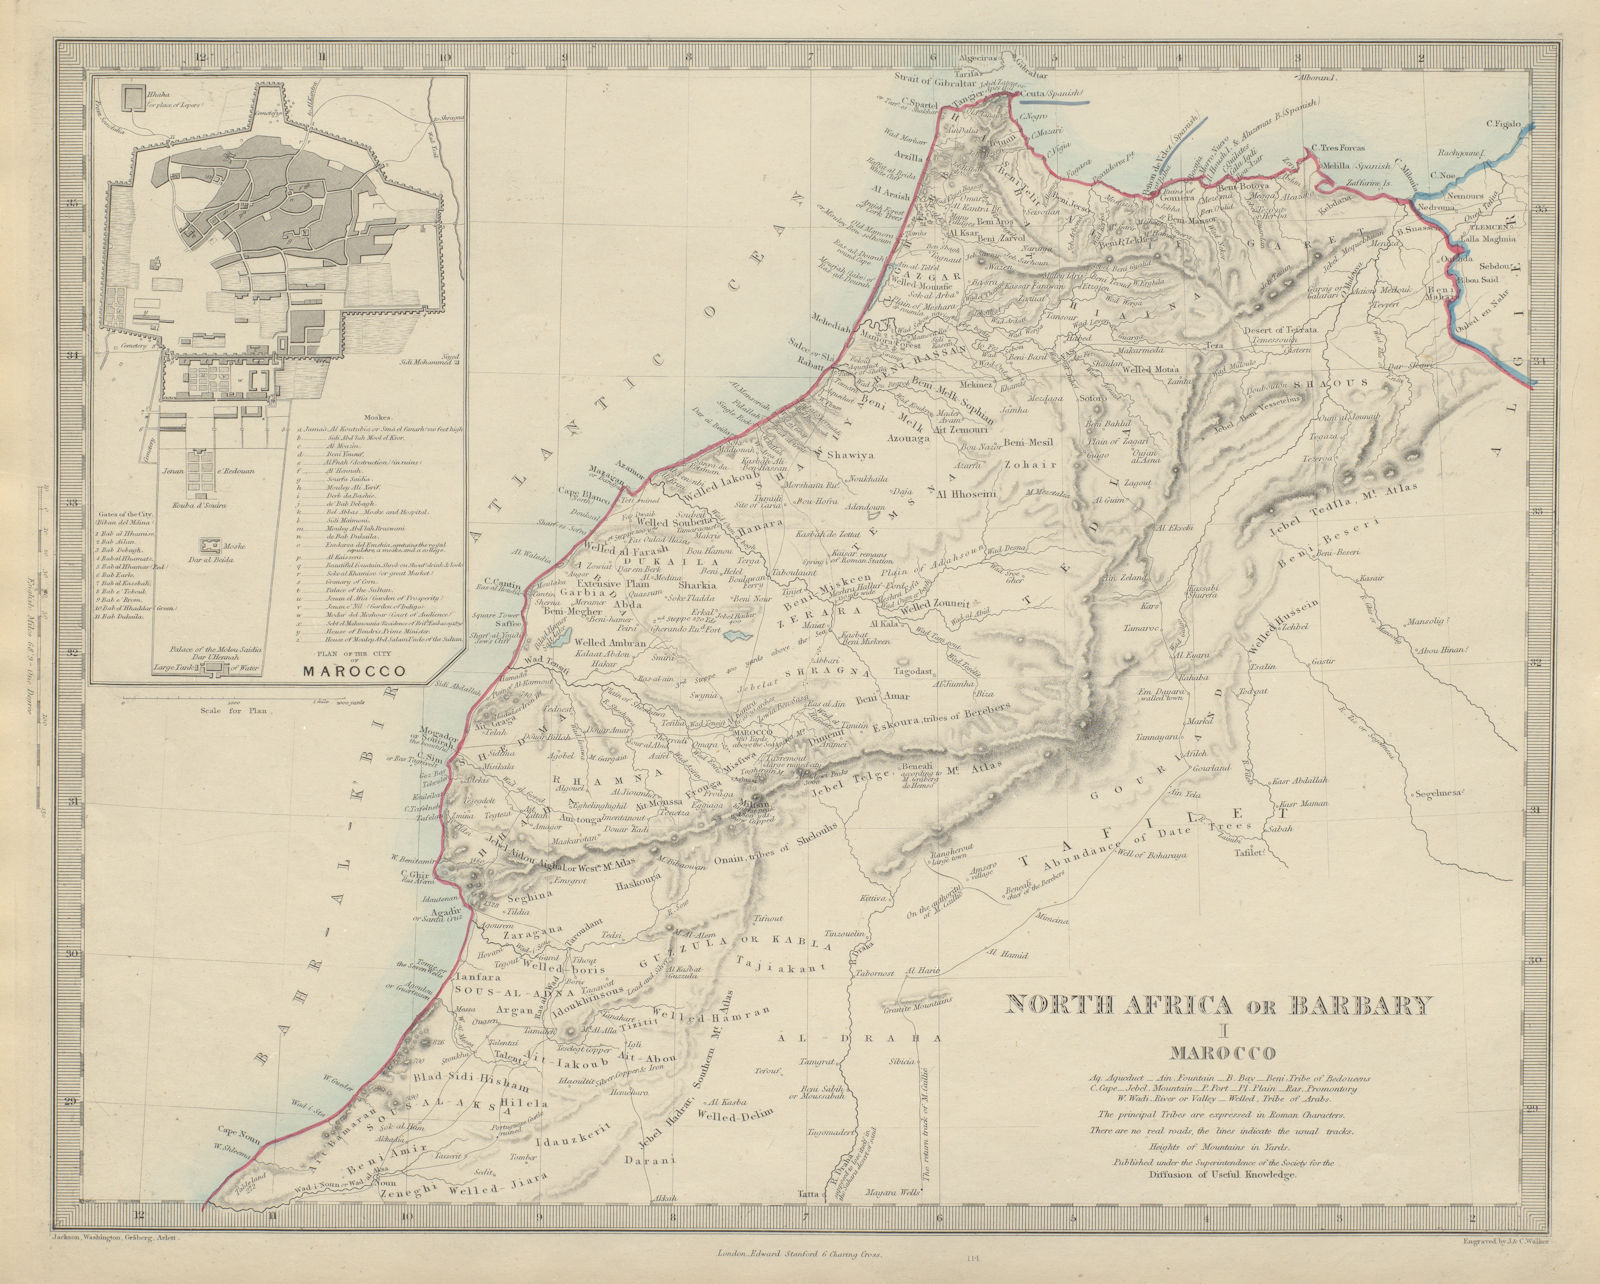 Associate Product MOROCCO. North Africa or Barbary. Marocco; inset Marrakech plan. SDUK 1874 map